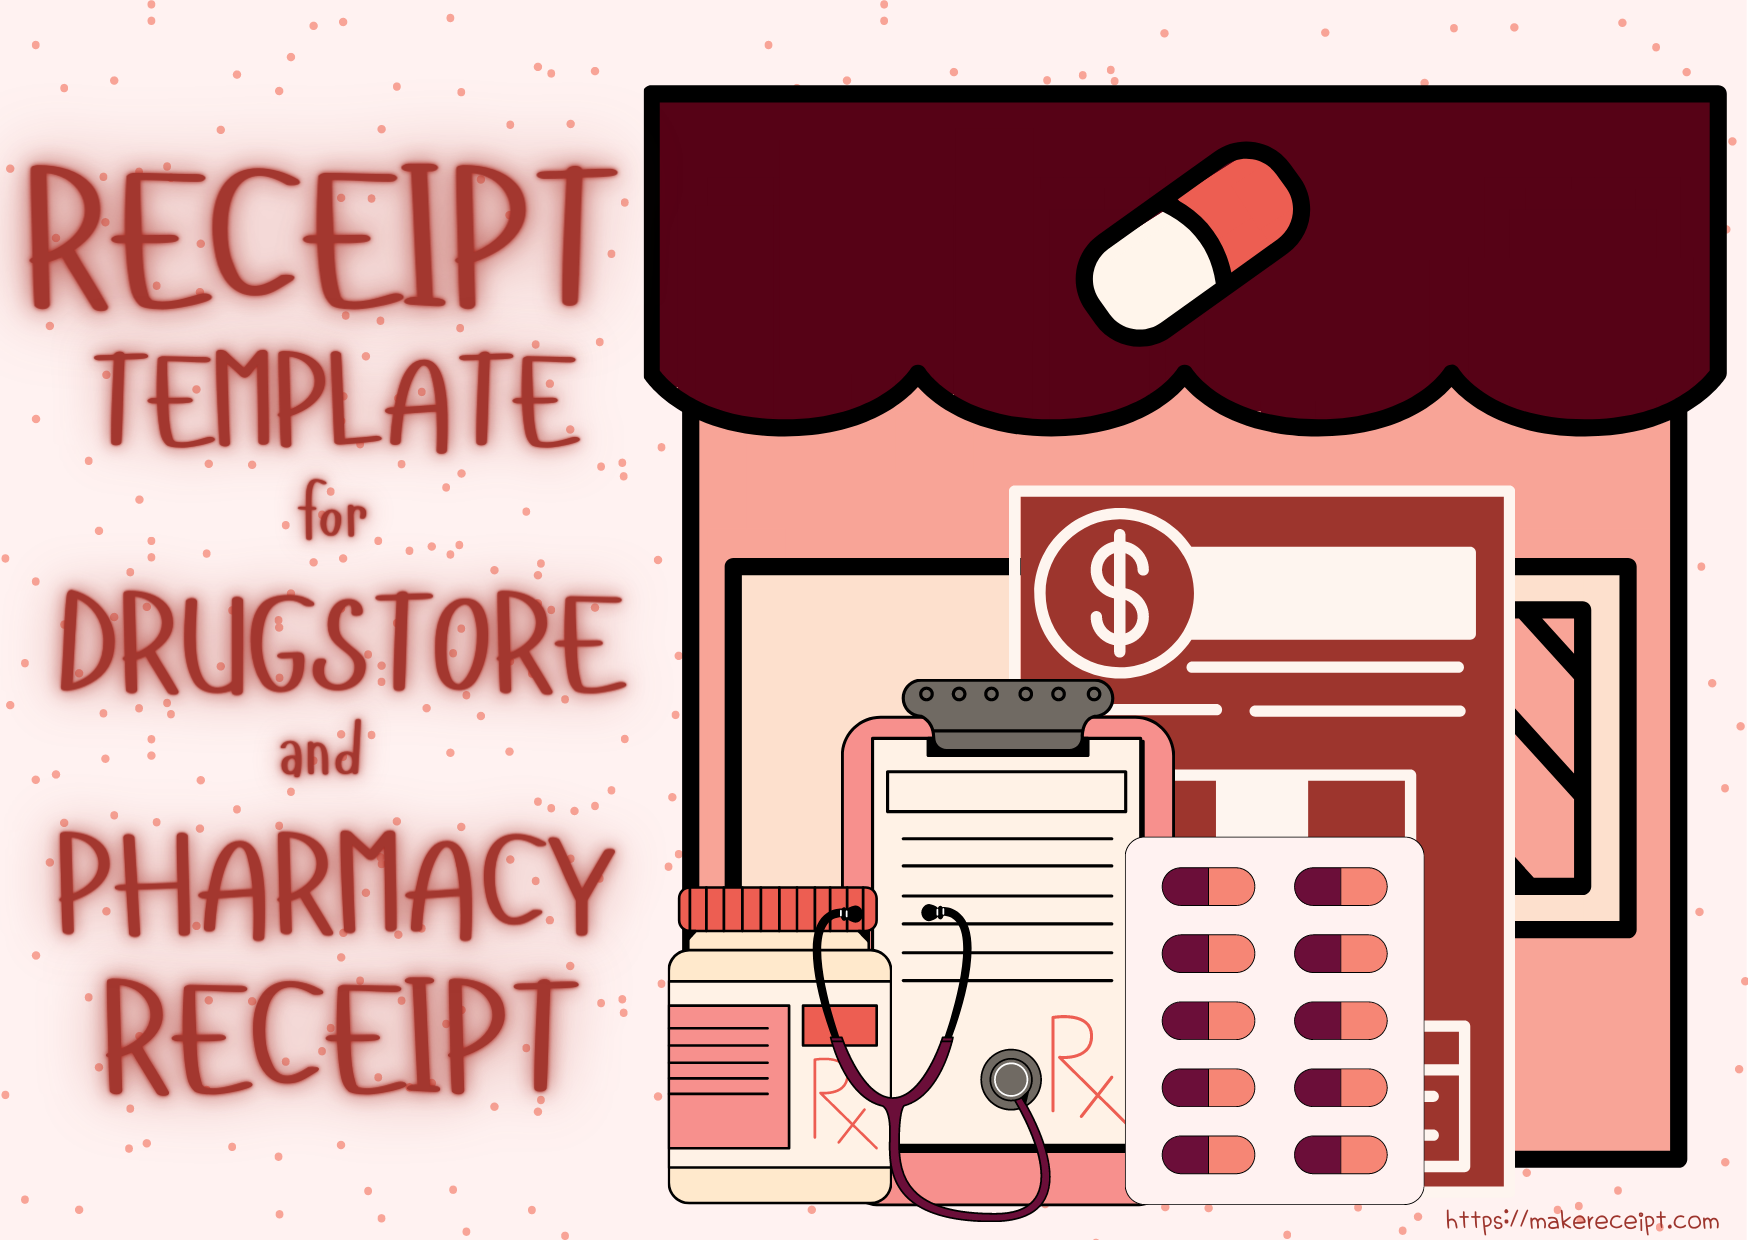 Receipt Template for Drugstore and Pharmacy Receipt